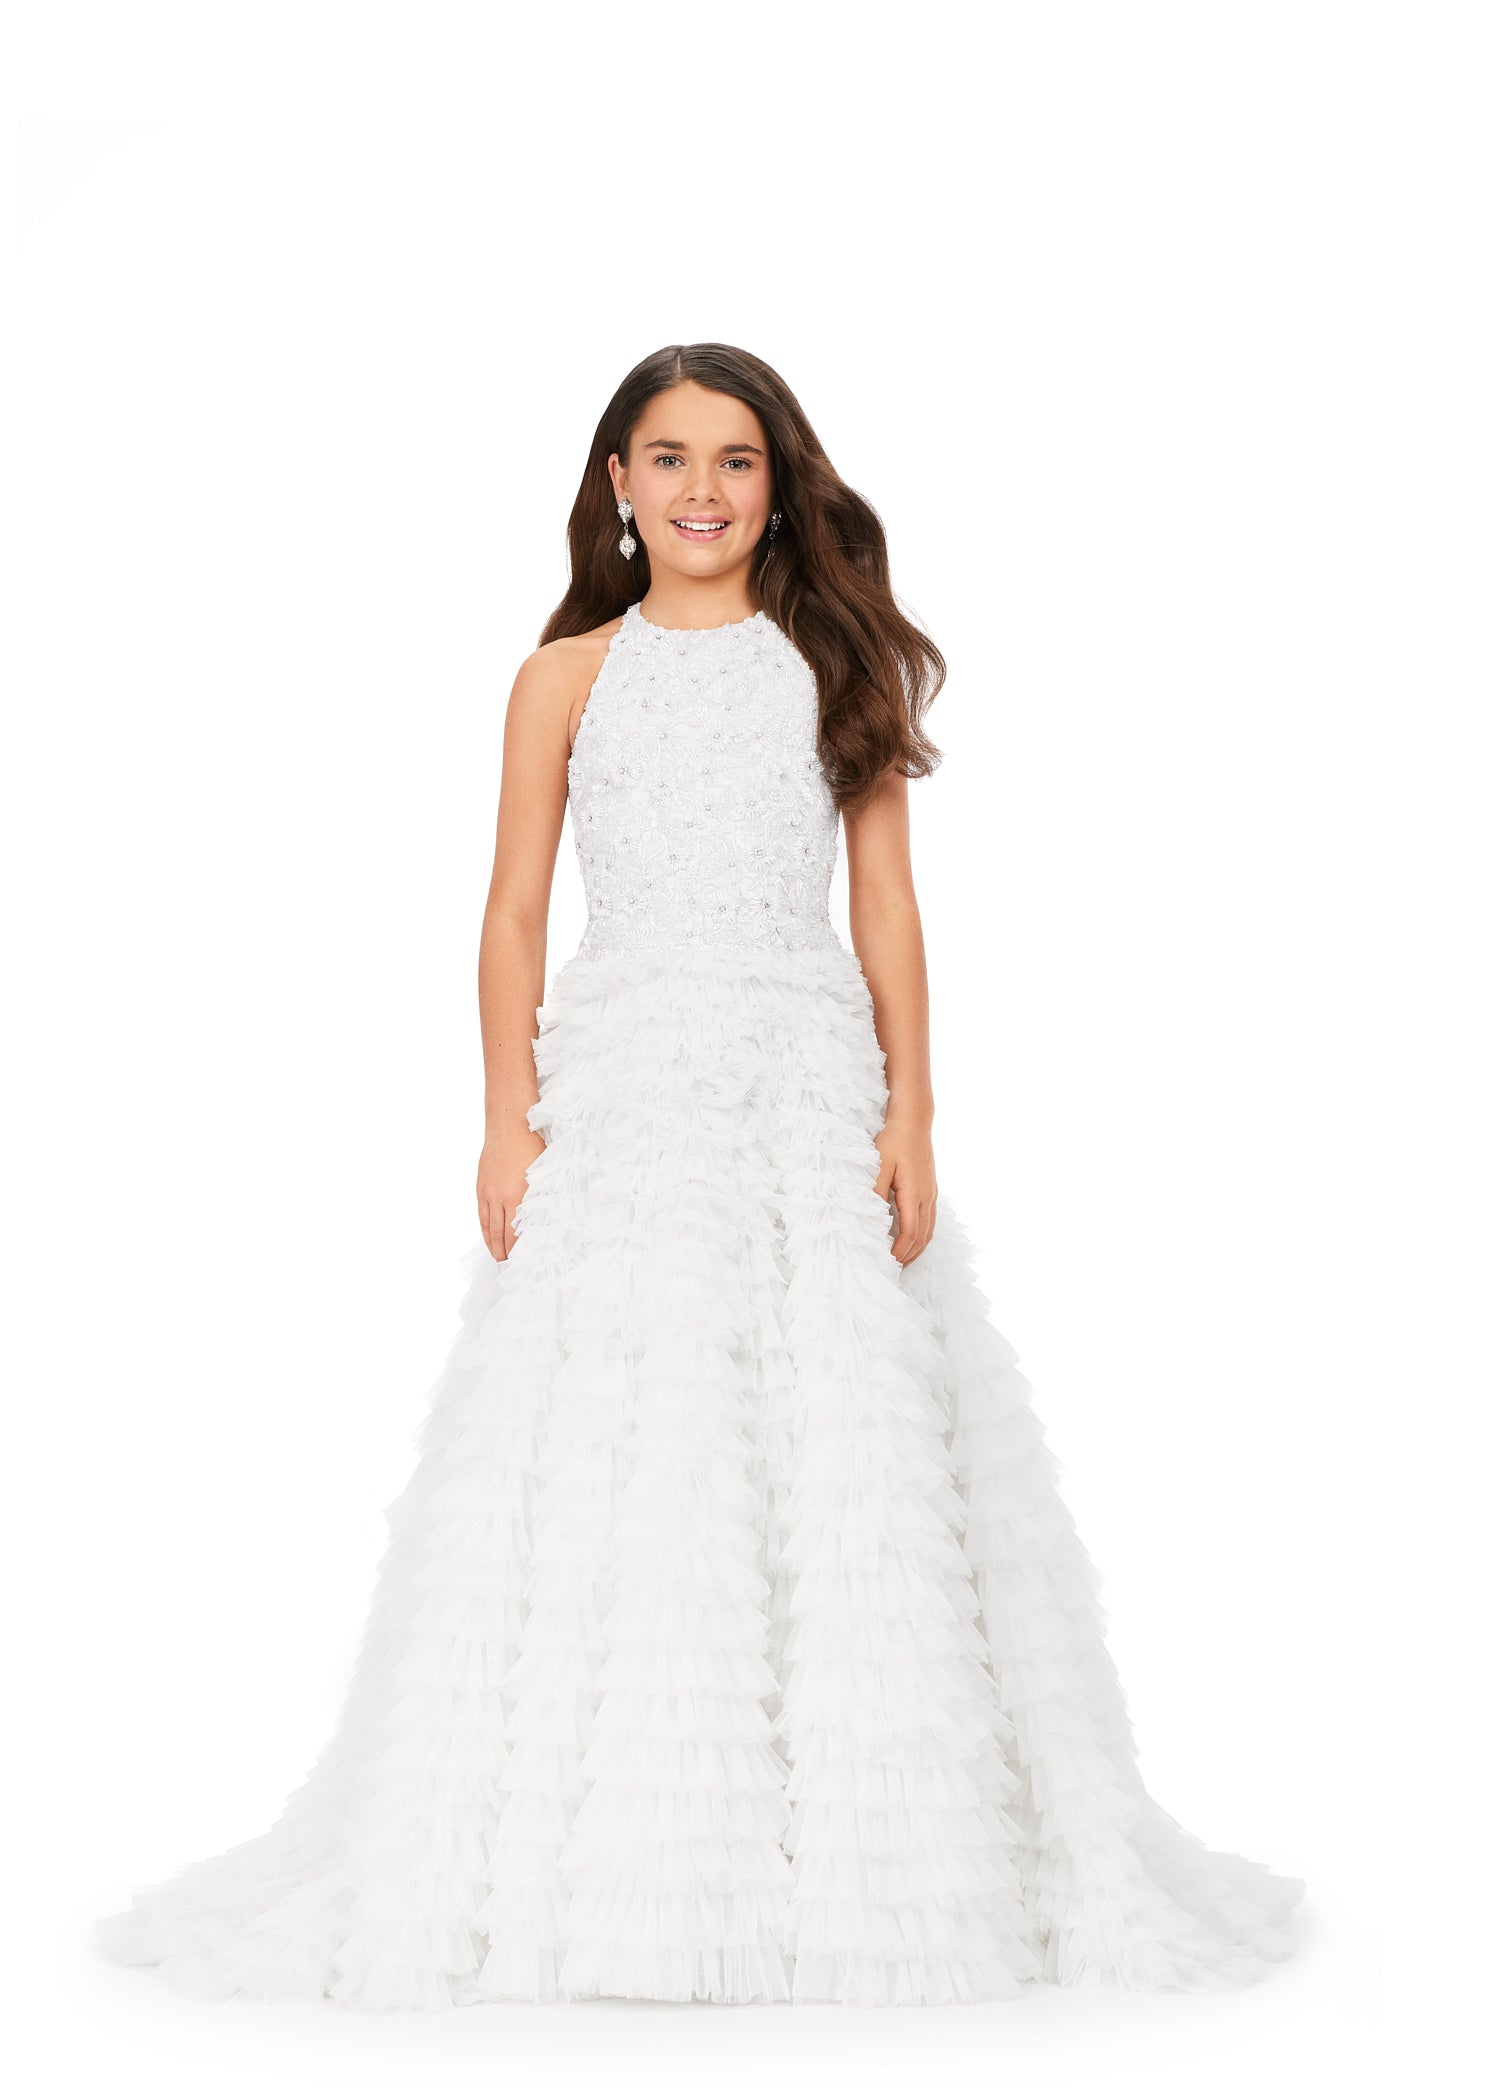 Ashley Lauren Kids 8198 Tulle Ruffles Beaded Bustier Halter Neckline Ballgown. Can you say FABULOUS?! This gorgeous gown features a beaded floral design throughout its halter top and an abundance of tulle ruffles throughout the skirt. The perfect amount of drama and sass for your little!